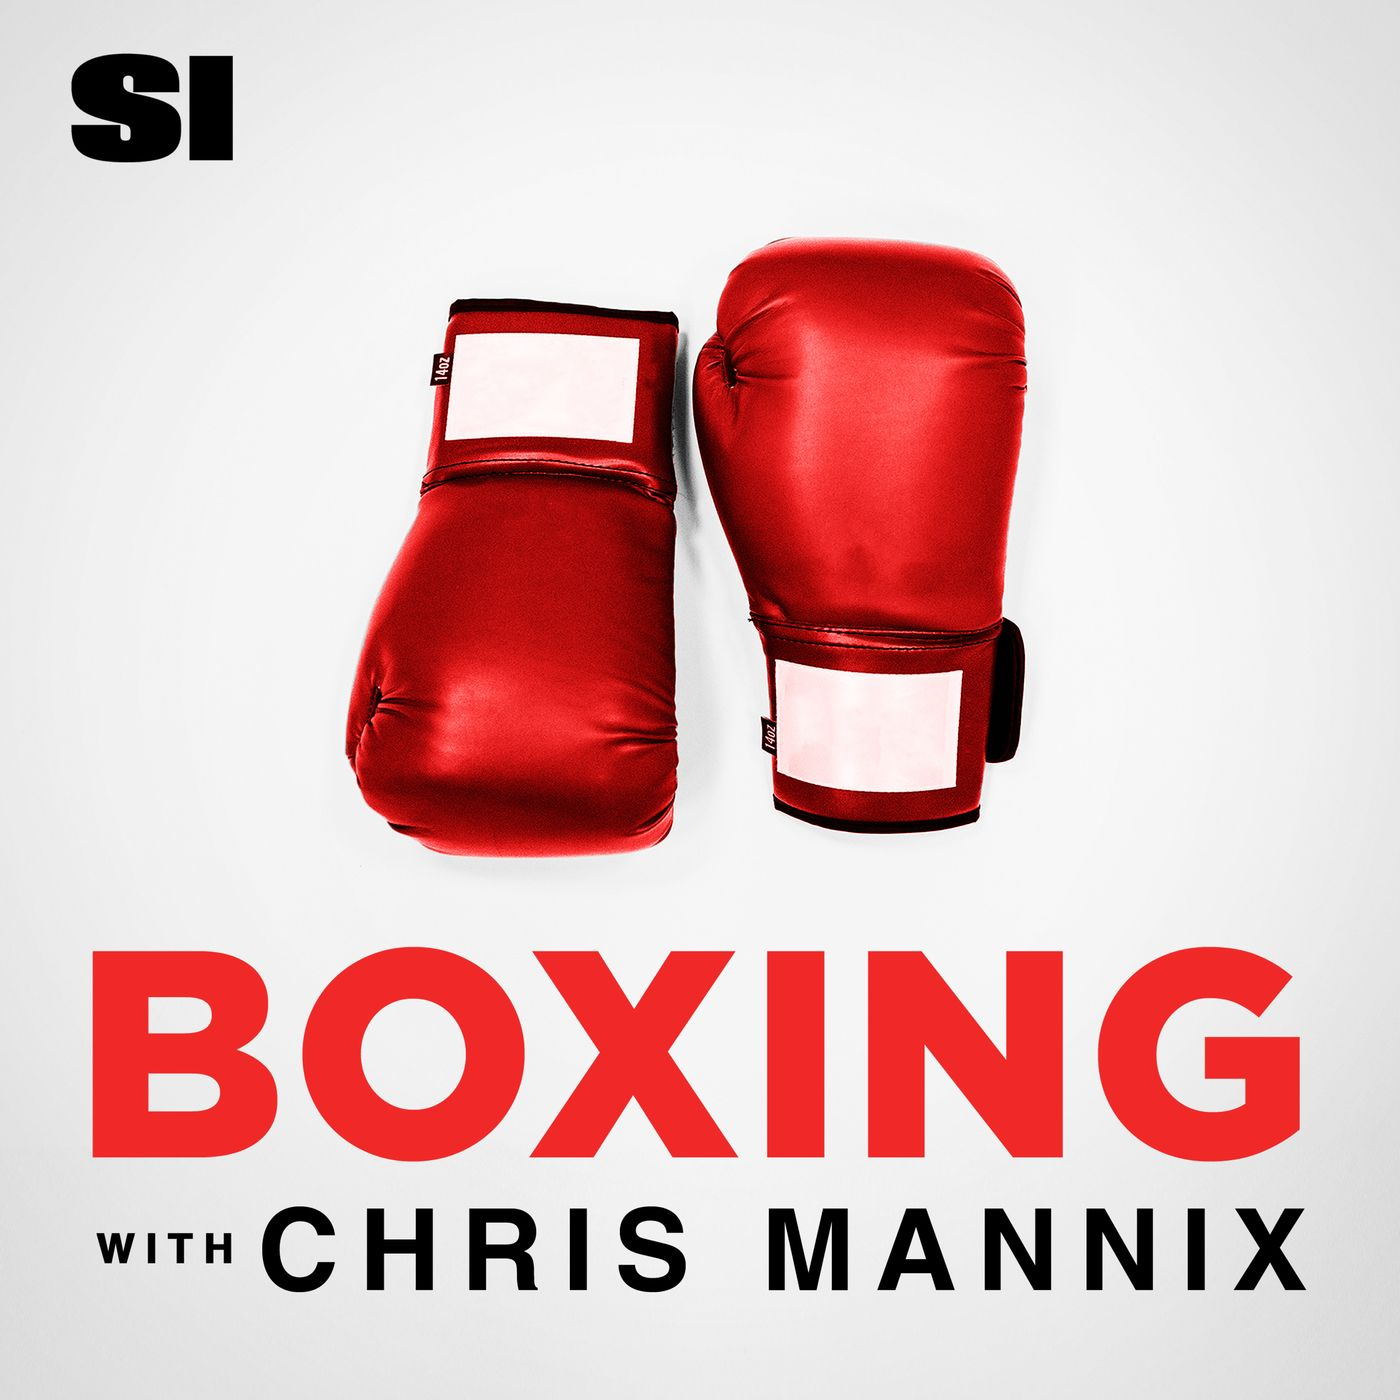 A highlight from Boxing with Chris Mannix - What's next for Anthony Joshua